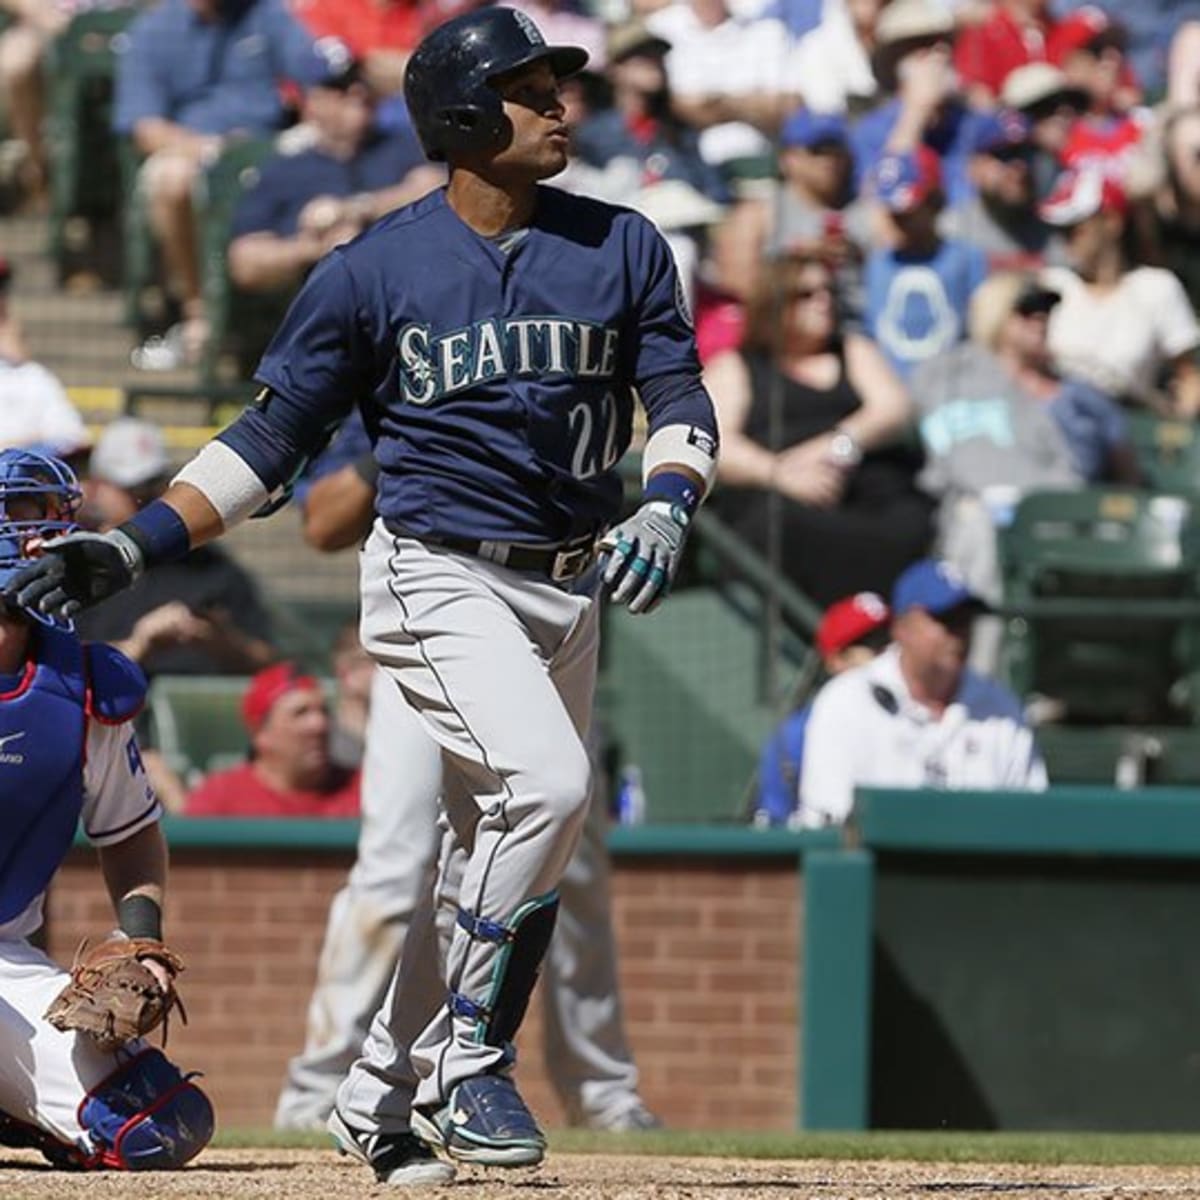 Robinson Cano's bat does its damage to Astros again